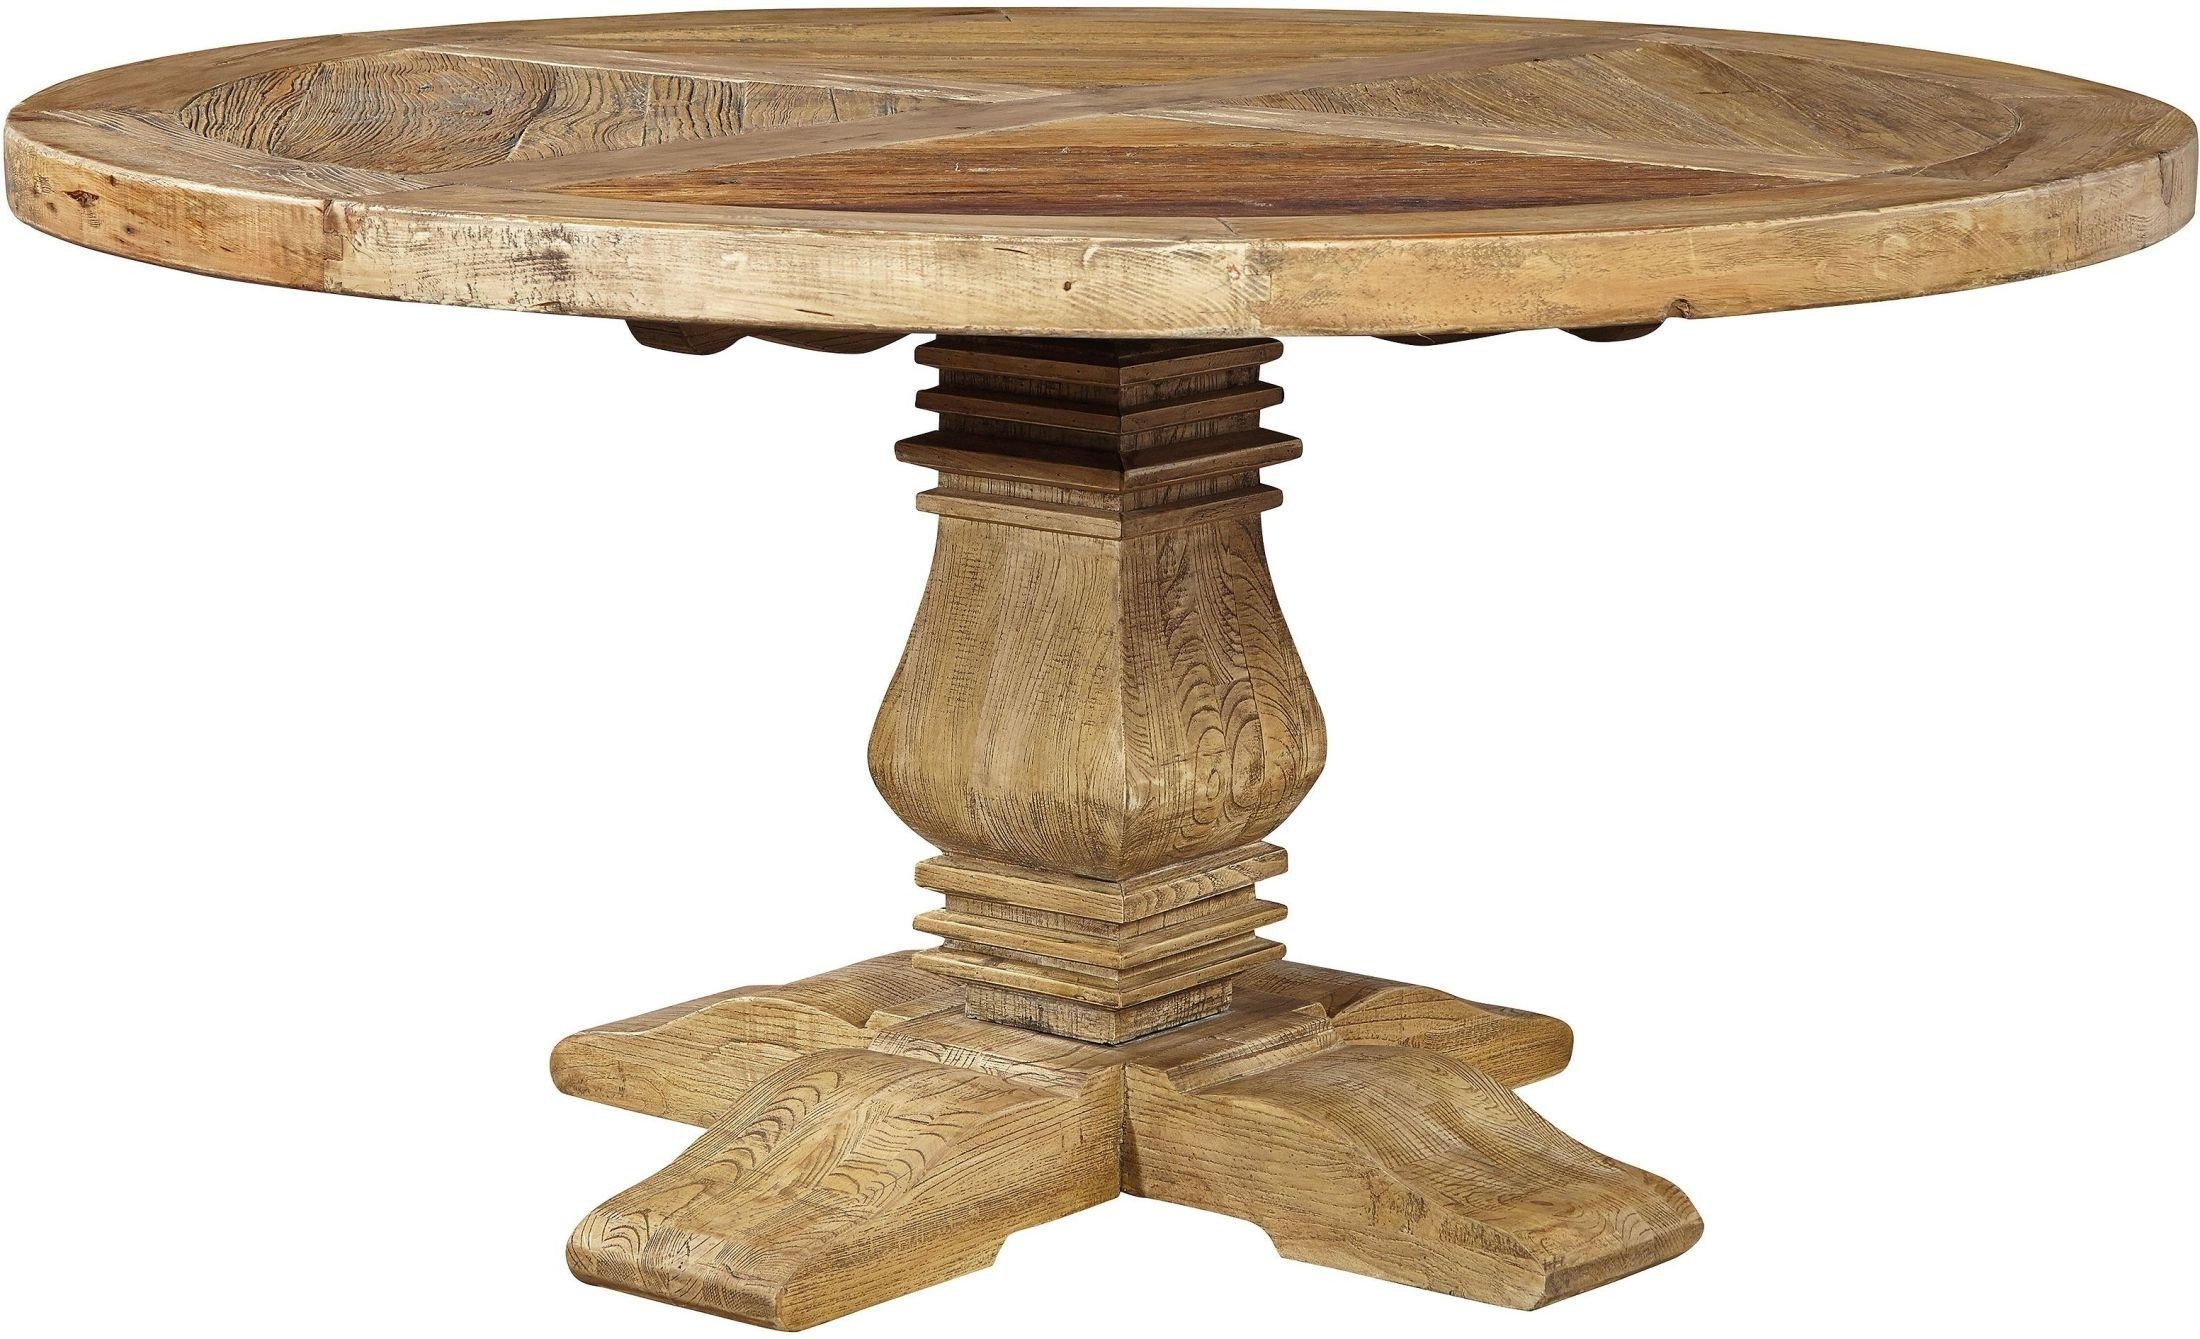 Manor house distressed round dining table from furniture